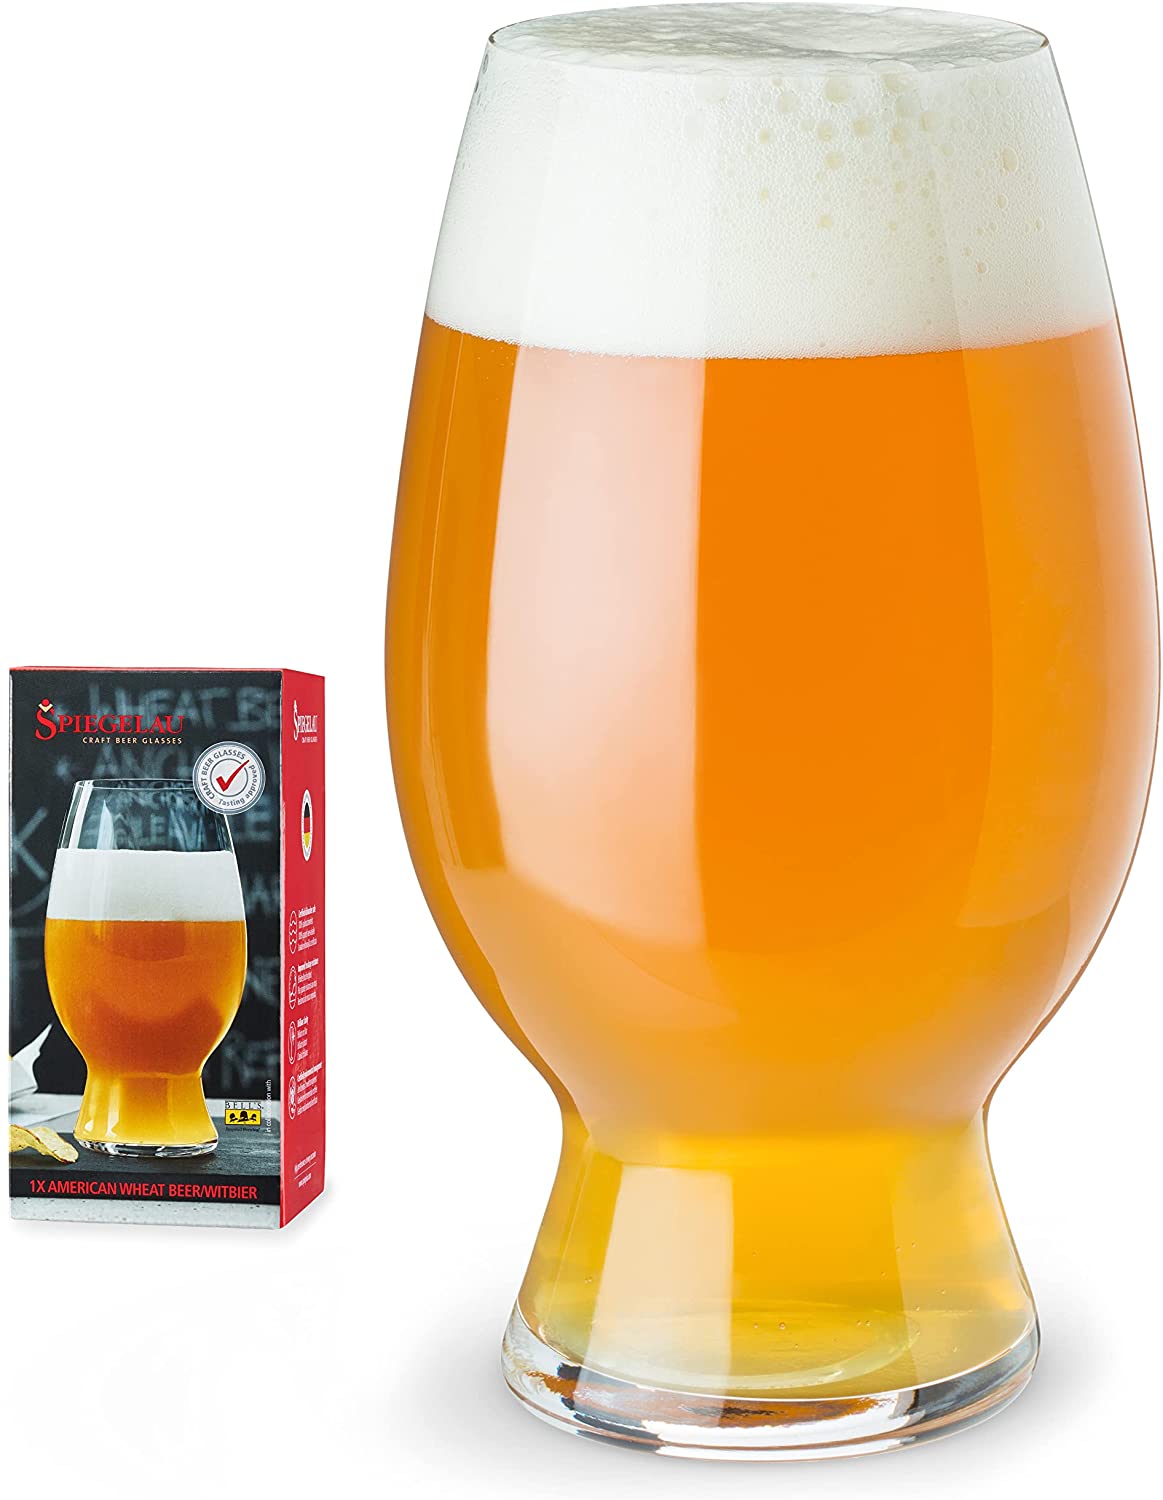 Spiegelau & Nachtmann, Motor Beer Glass for American Wheat Beer/Witbier, Crystal Glass, 750 ml, Craft Beer Glasses, 4992553